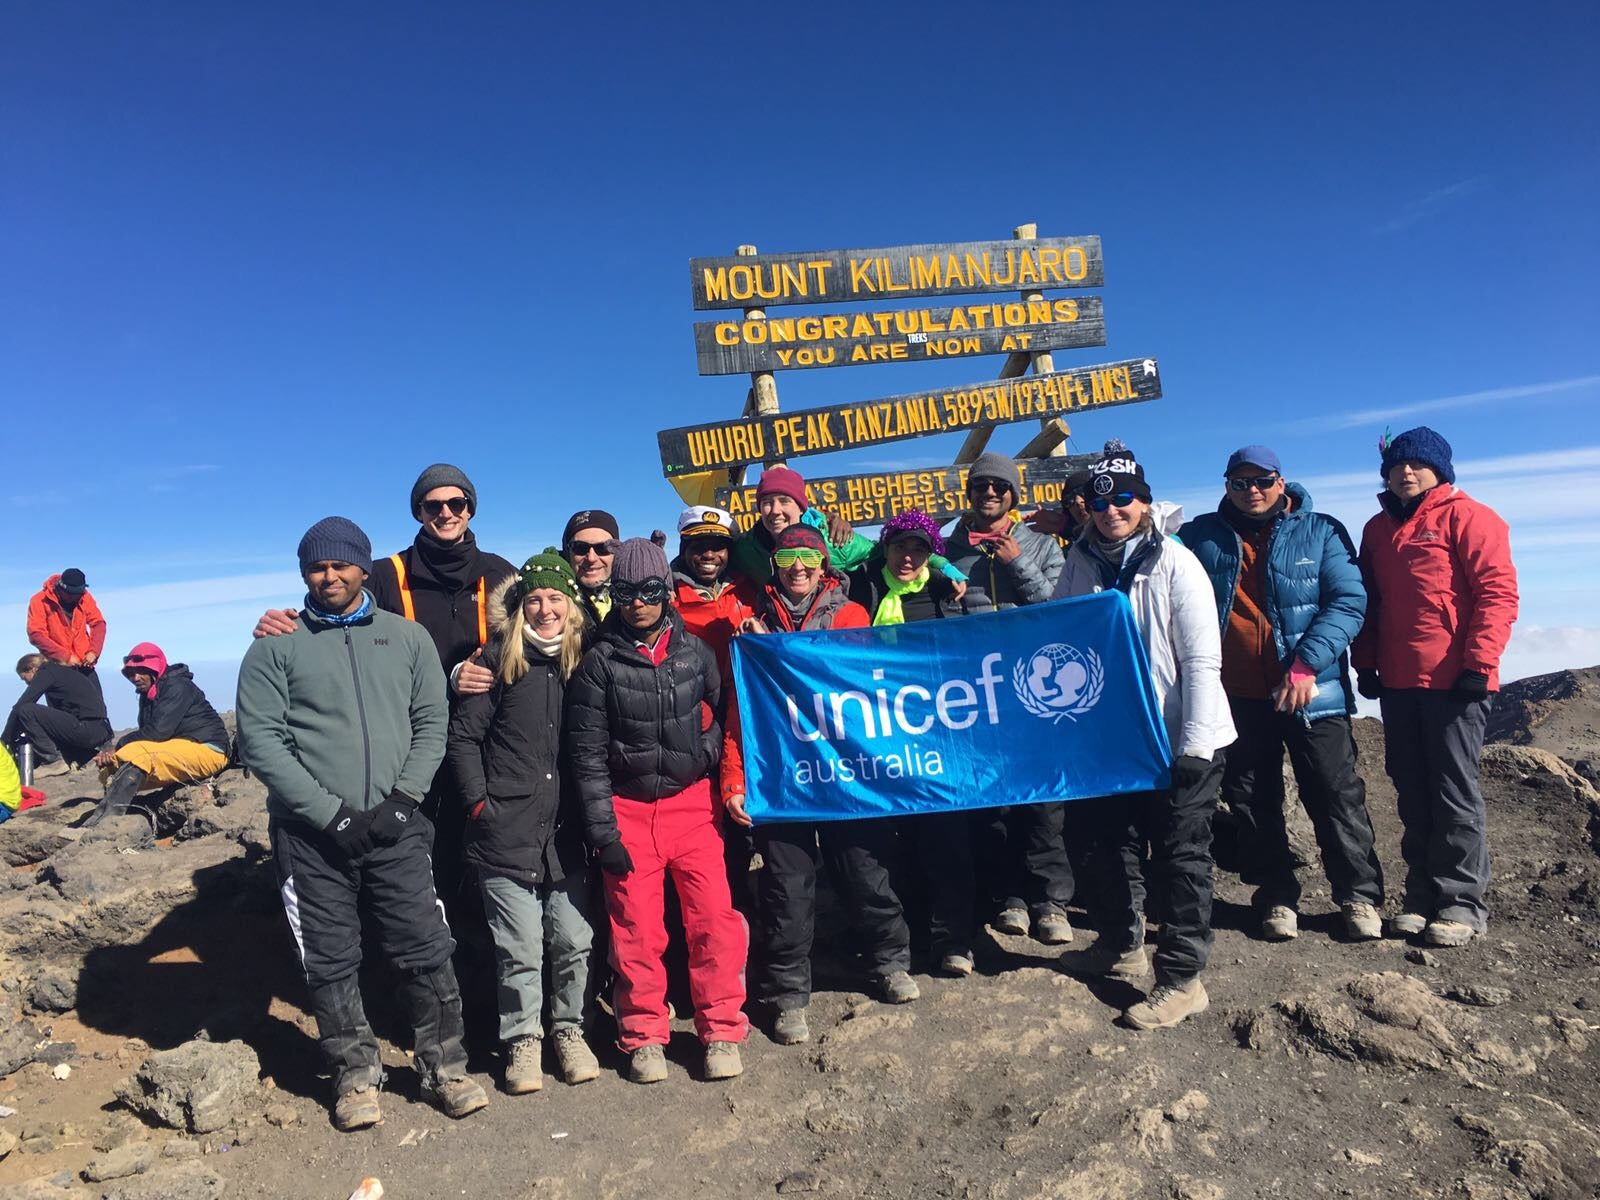 A group of people at the top of Mt. Kilimanjaro. They are holding a UNICEF flag.